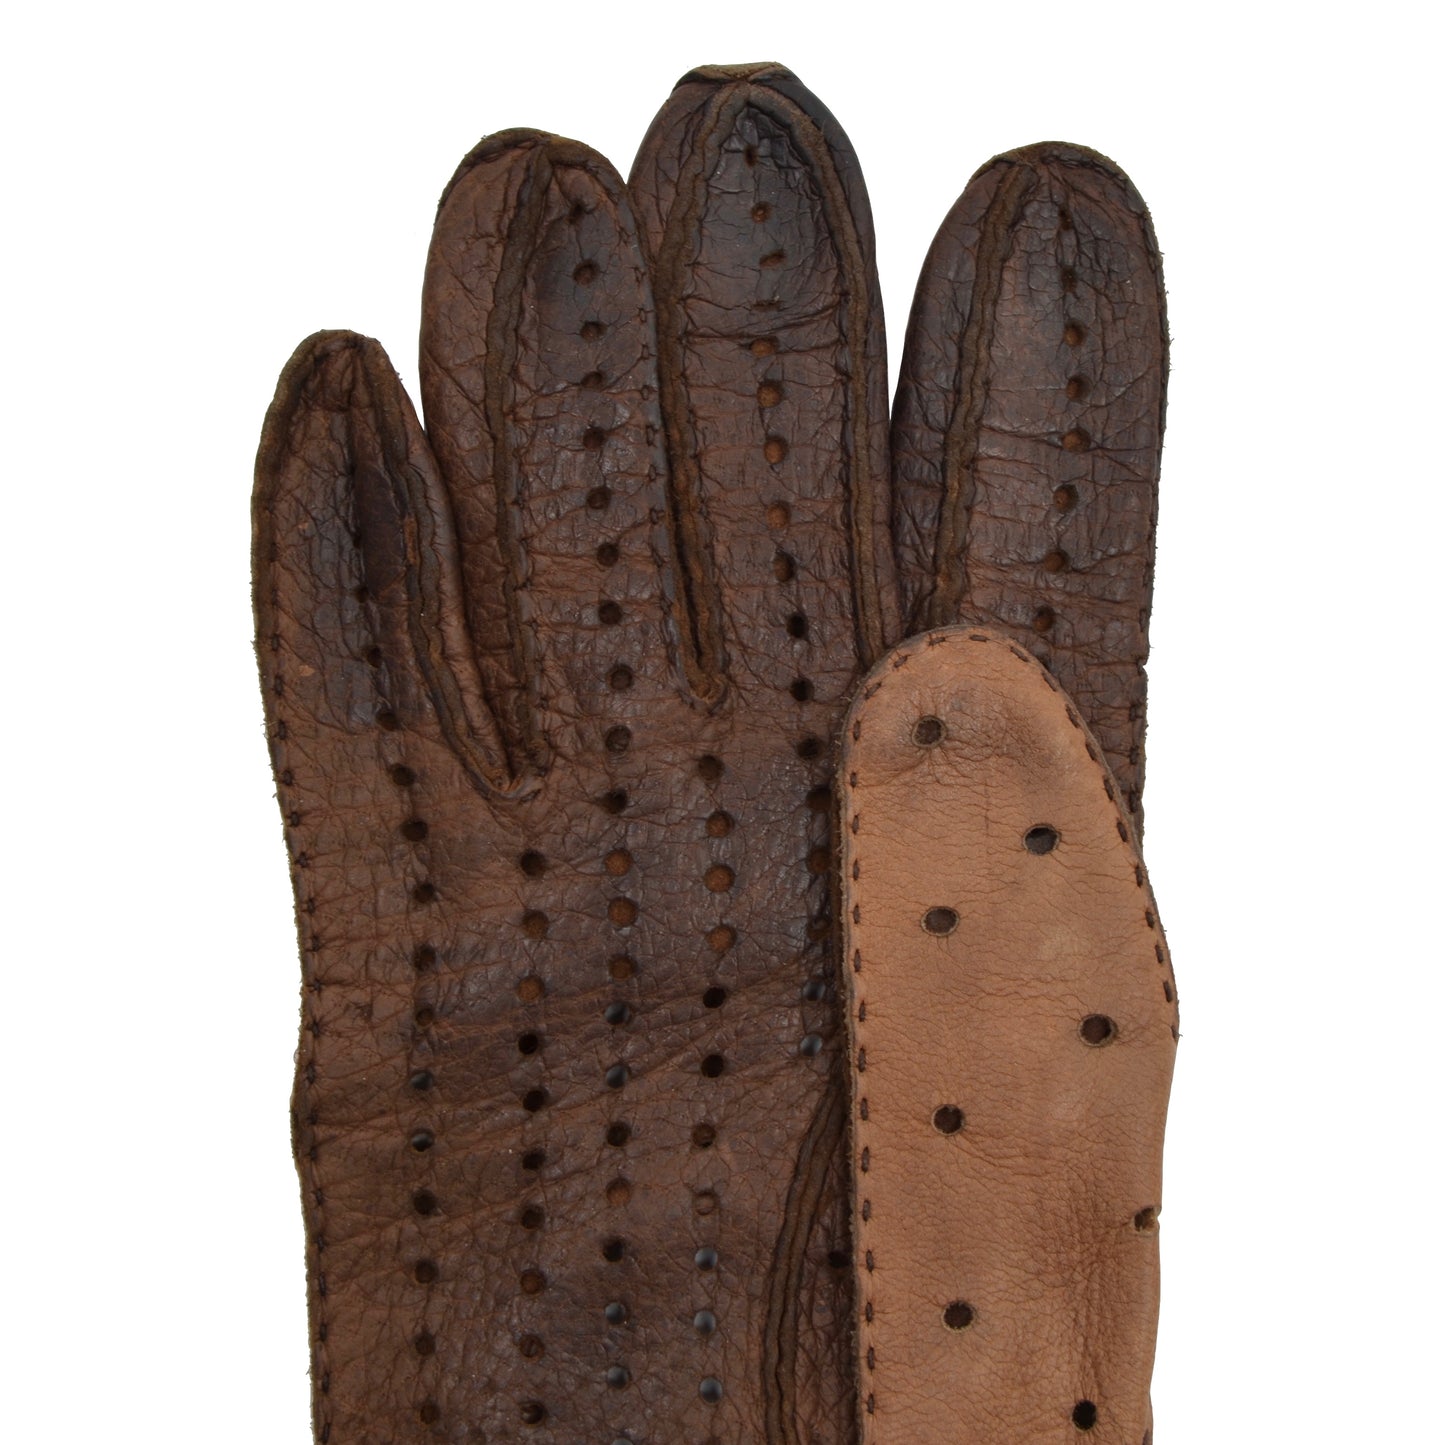 Unlined Peccary & Leather Driving Gloves - Brown/Tan